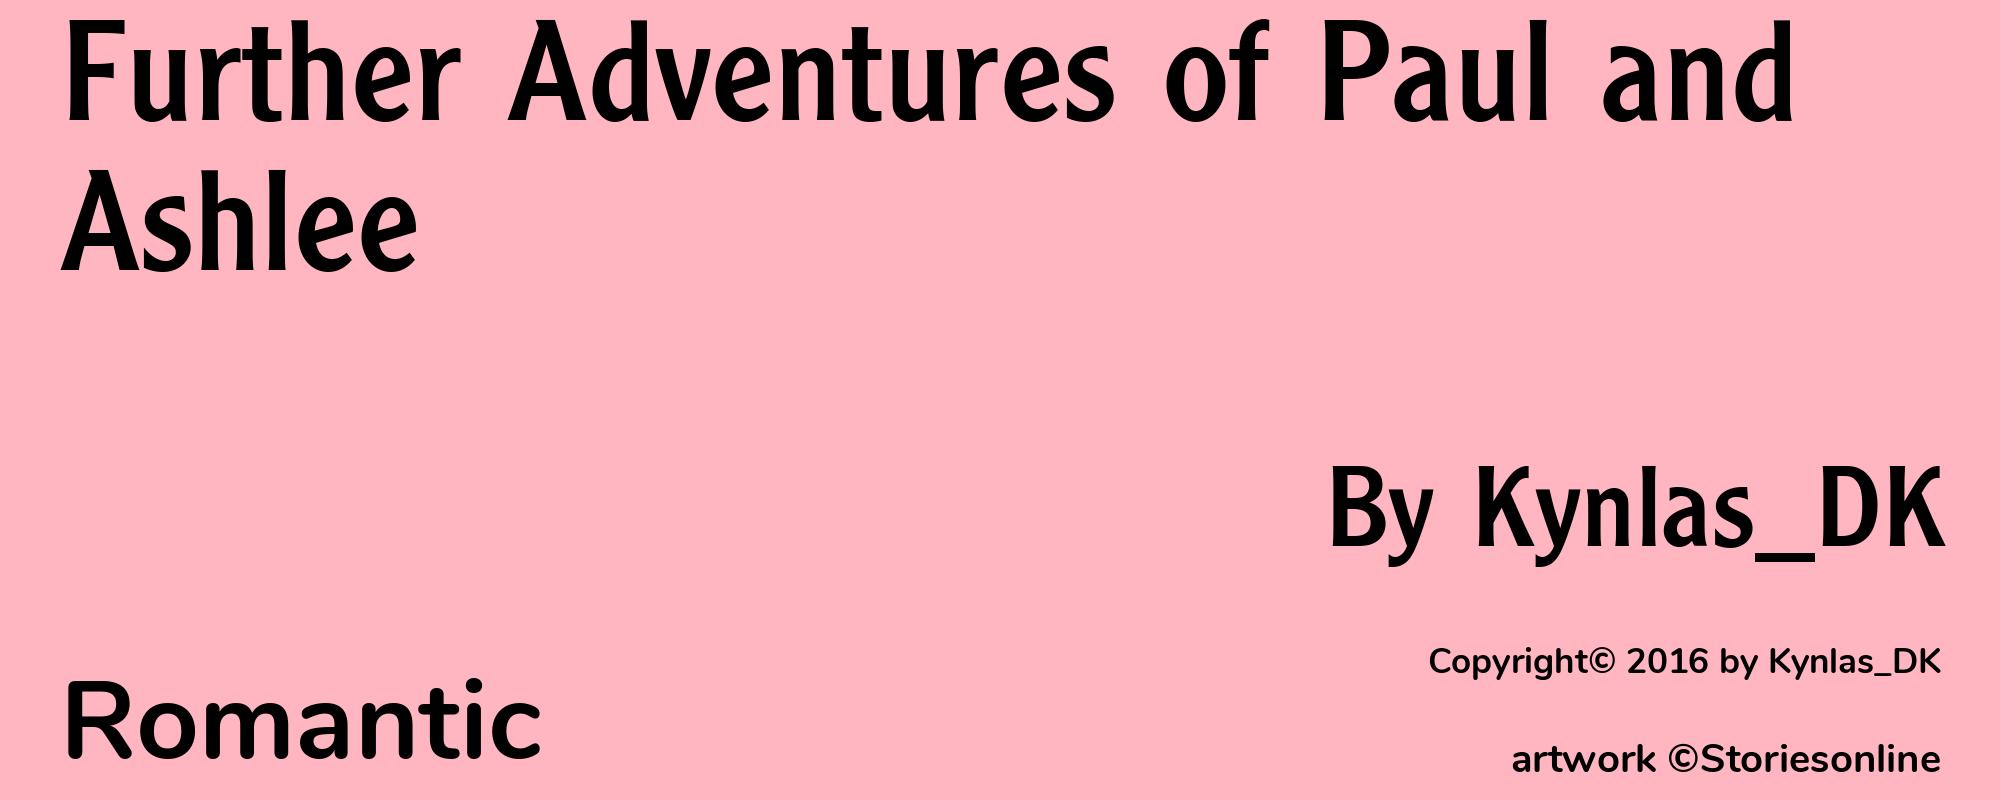 Further Adventures of Paul and Ashlee - Cover